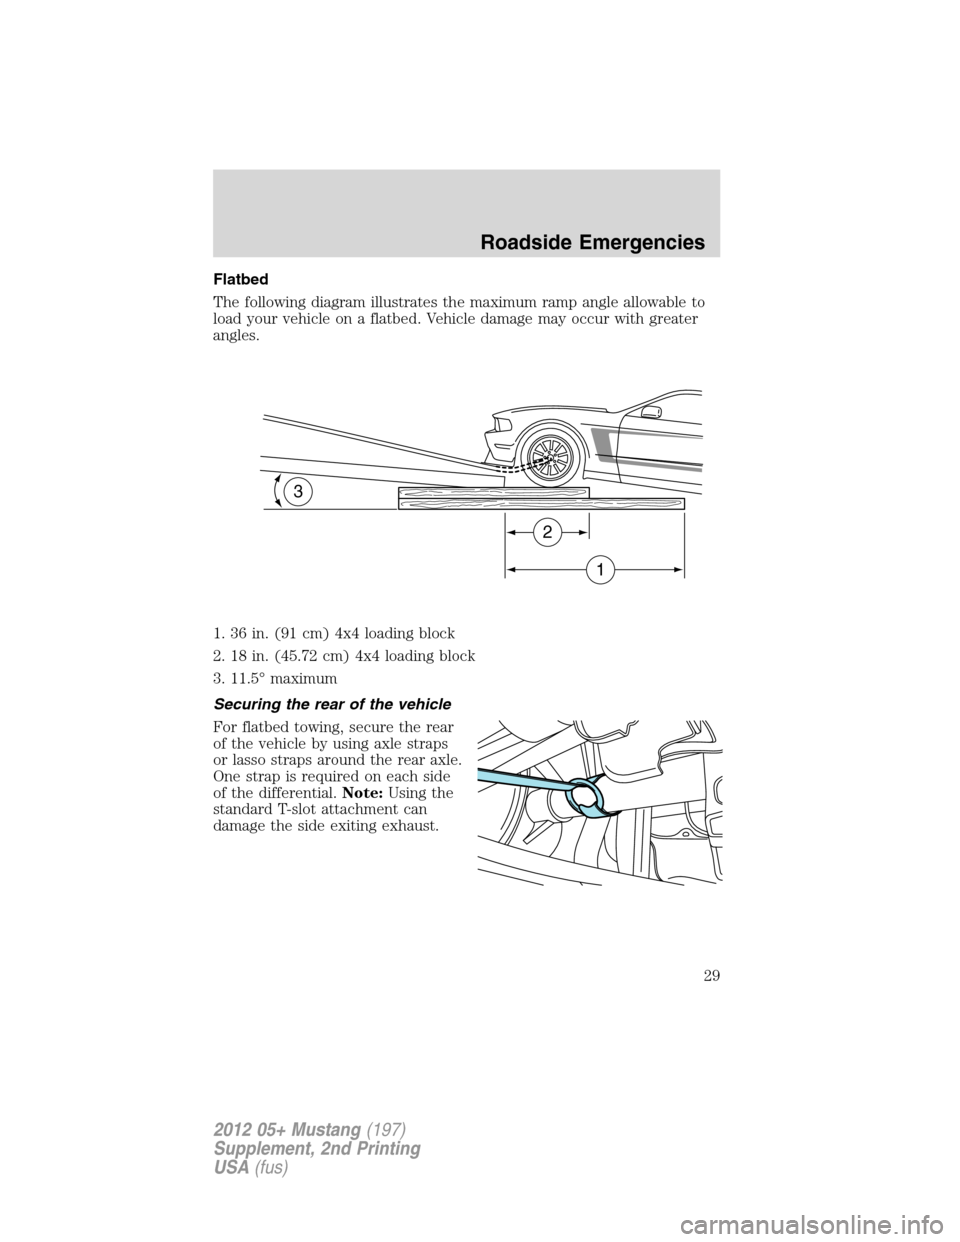 FORD MUSTANG 2012 5.G Boss 302 Supplement Manual Flatbed
The following diagram illustrates the maximum ramp angle allowable to
load your vehicle on a flatbed. Vehicle damage may occur with greater
angles.
1. 36 in. (91 cm) 4x4 loading block
2. 18 in